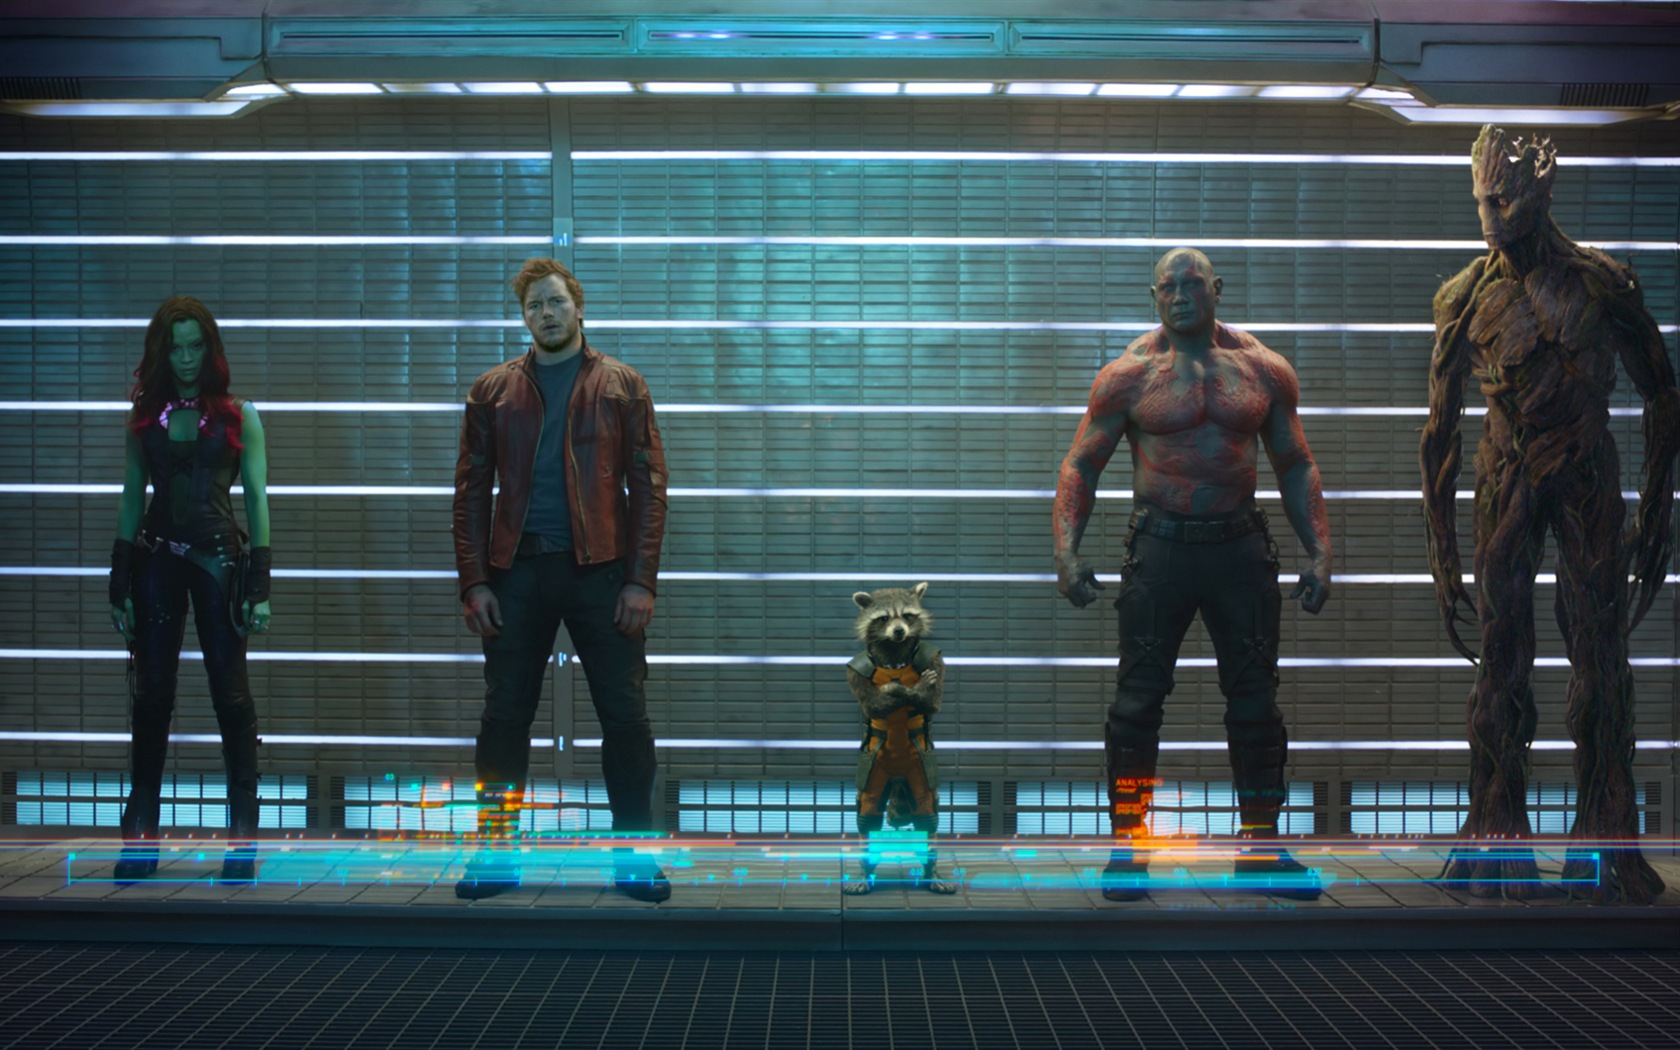 Guardians of the Galaxy 2014 HD movie wallpapers #5 - 1680x1050